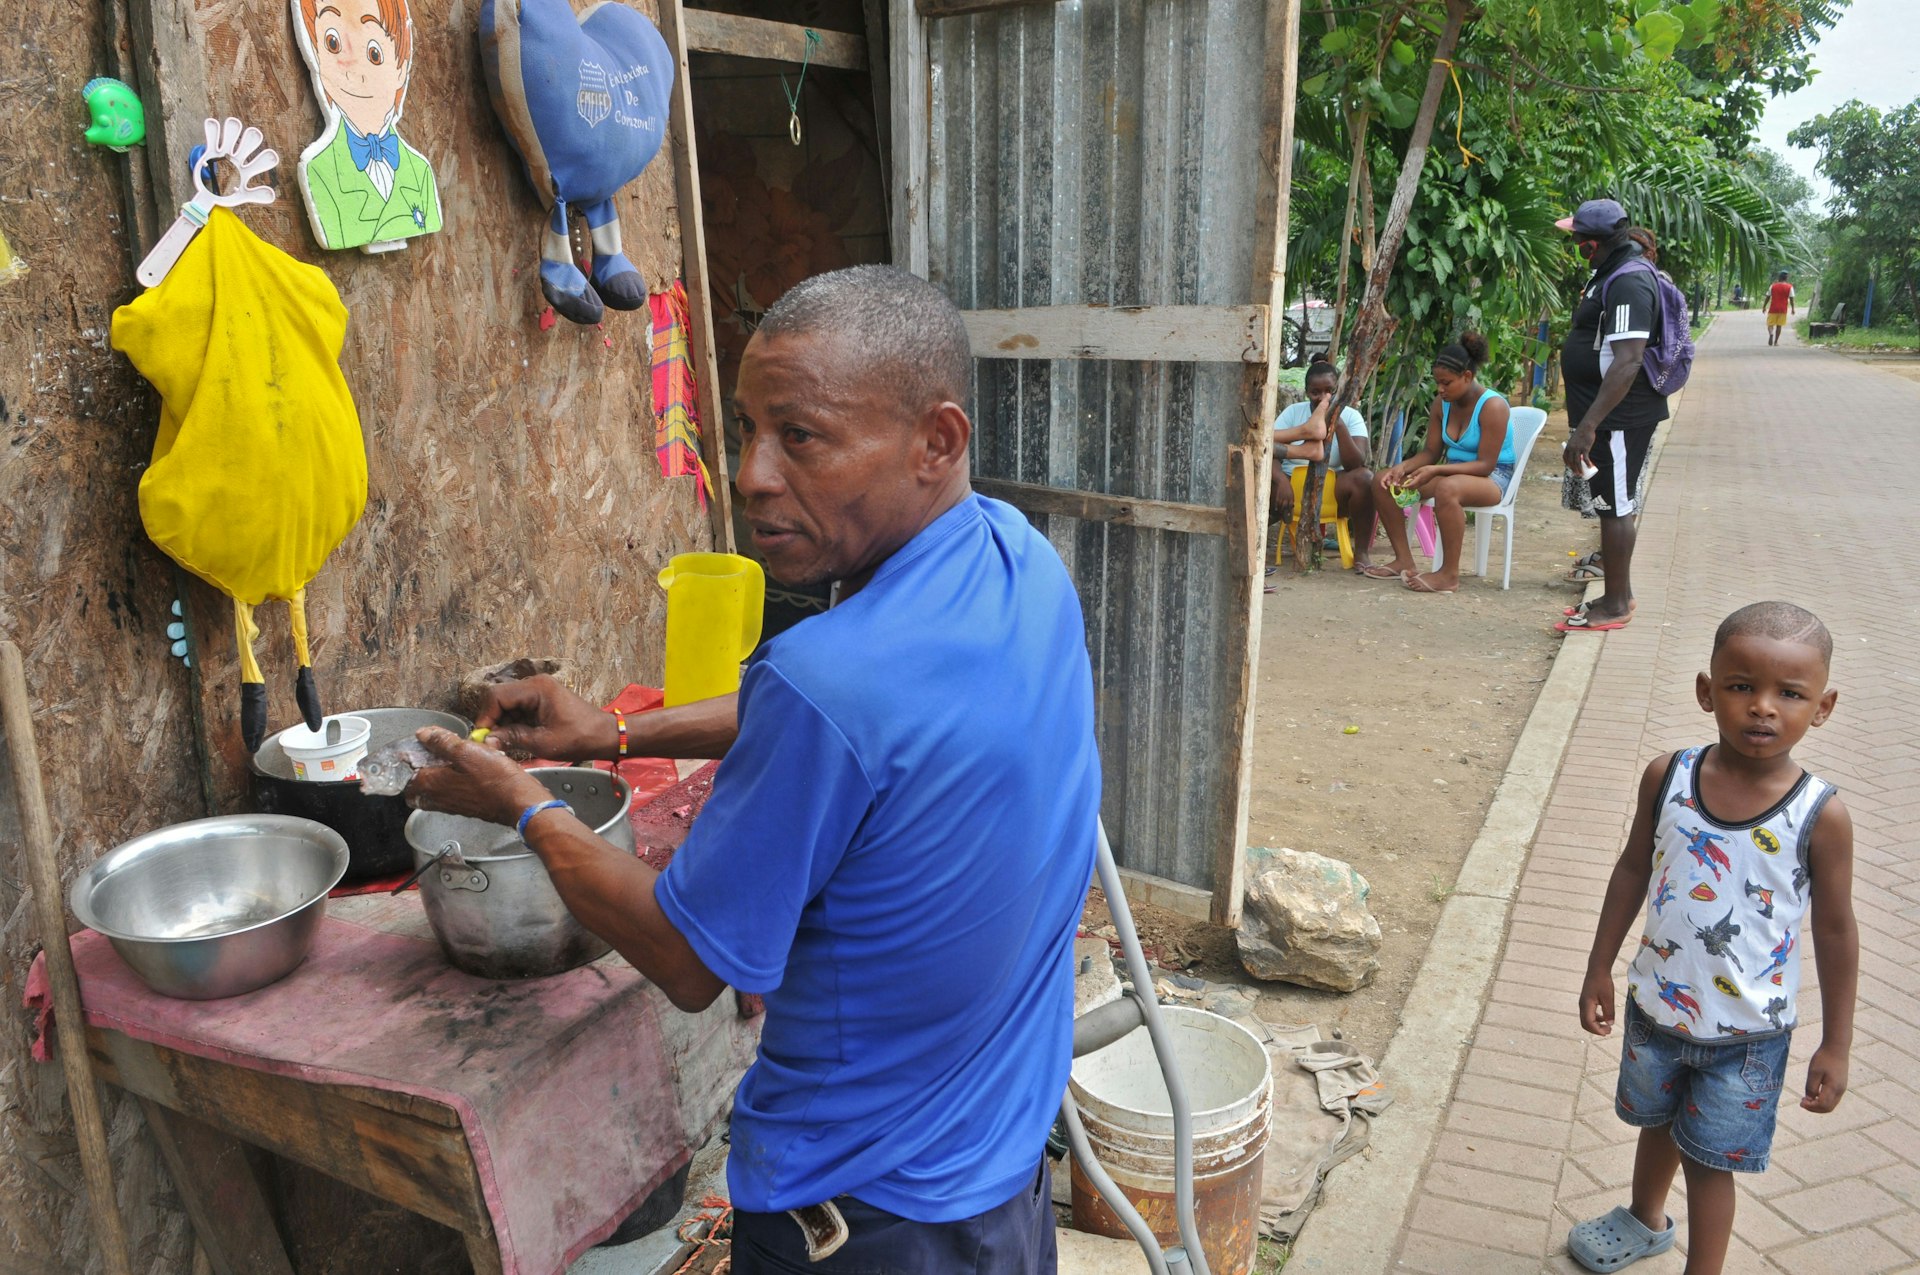 A man prepares a meal in a street of the Nigeria neighbourhood in the Isla Trinitaria section of southern Guayaquil, Ecuador. A young boy stands next to him looking at the camera.  